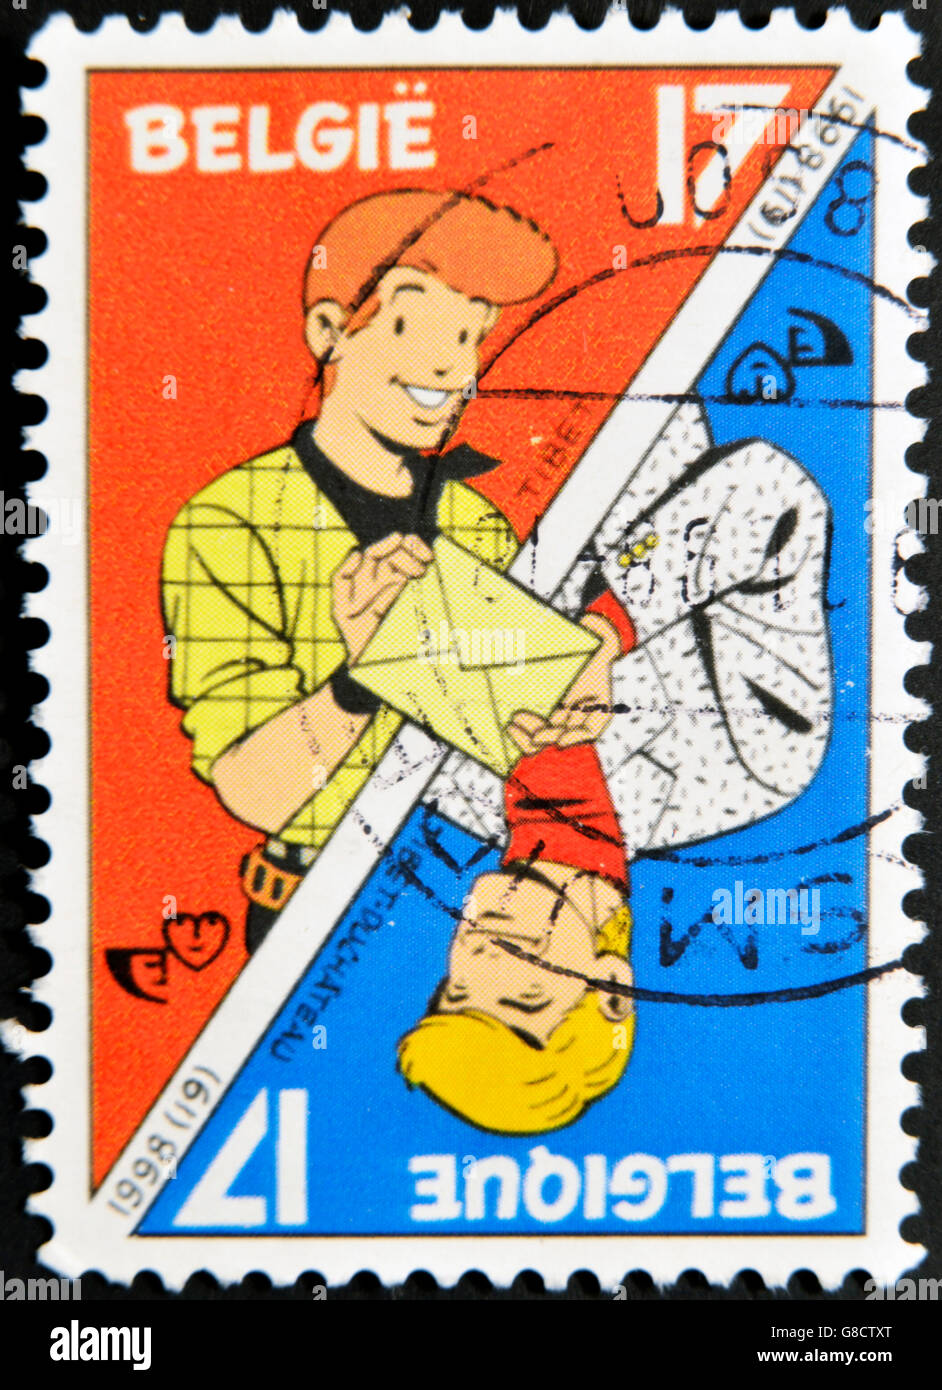 BELGIUM - CIRCA 1998: A stamp printed in Belgium shows Hero of the comic strips and Playing card, circa 1998 Stock Photo